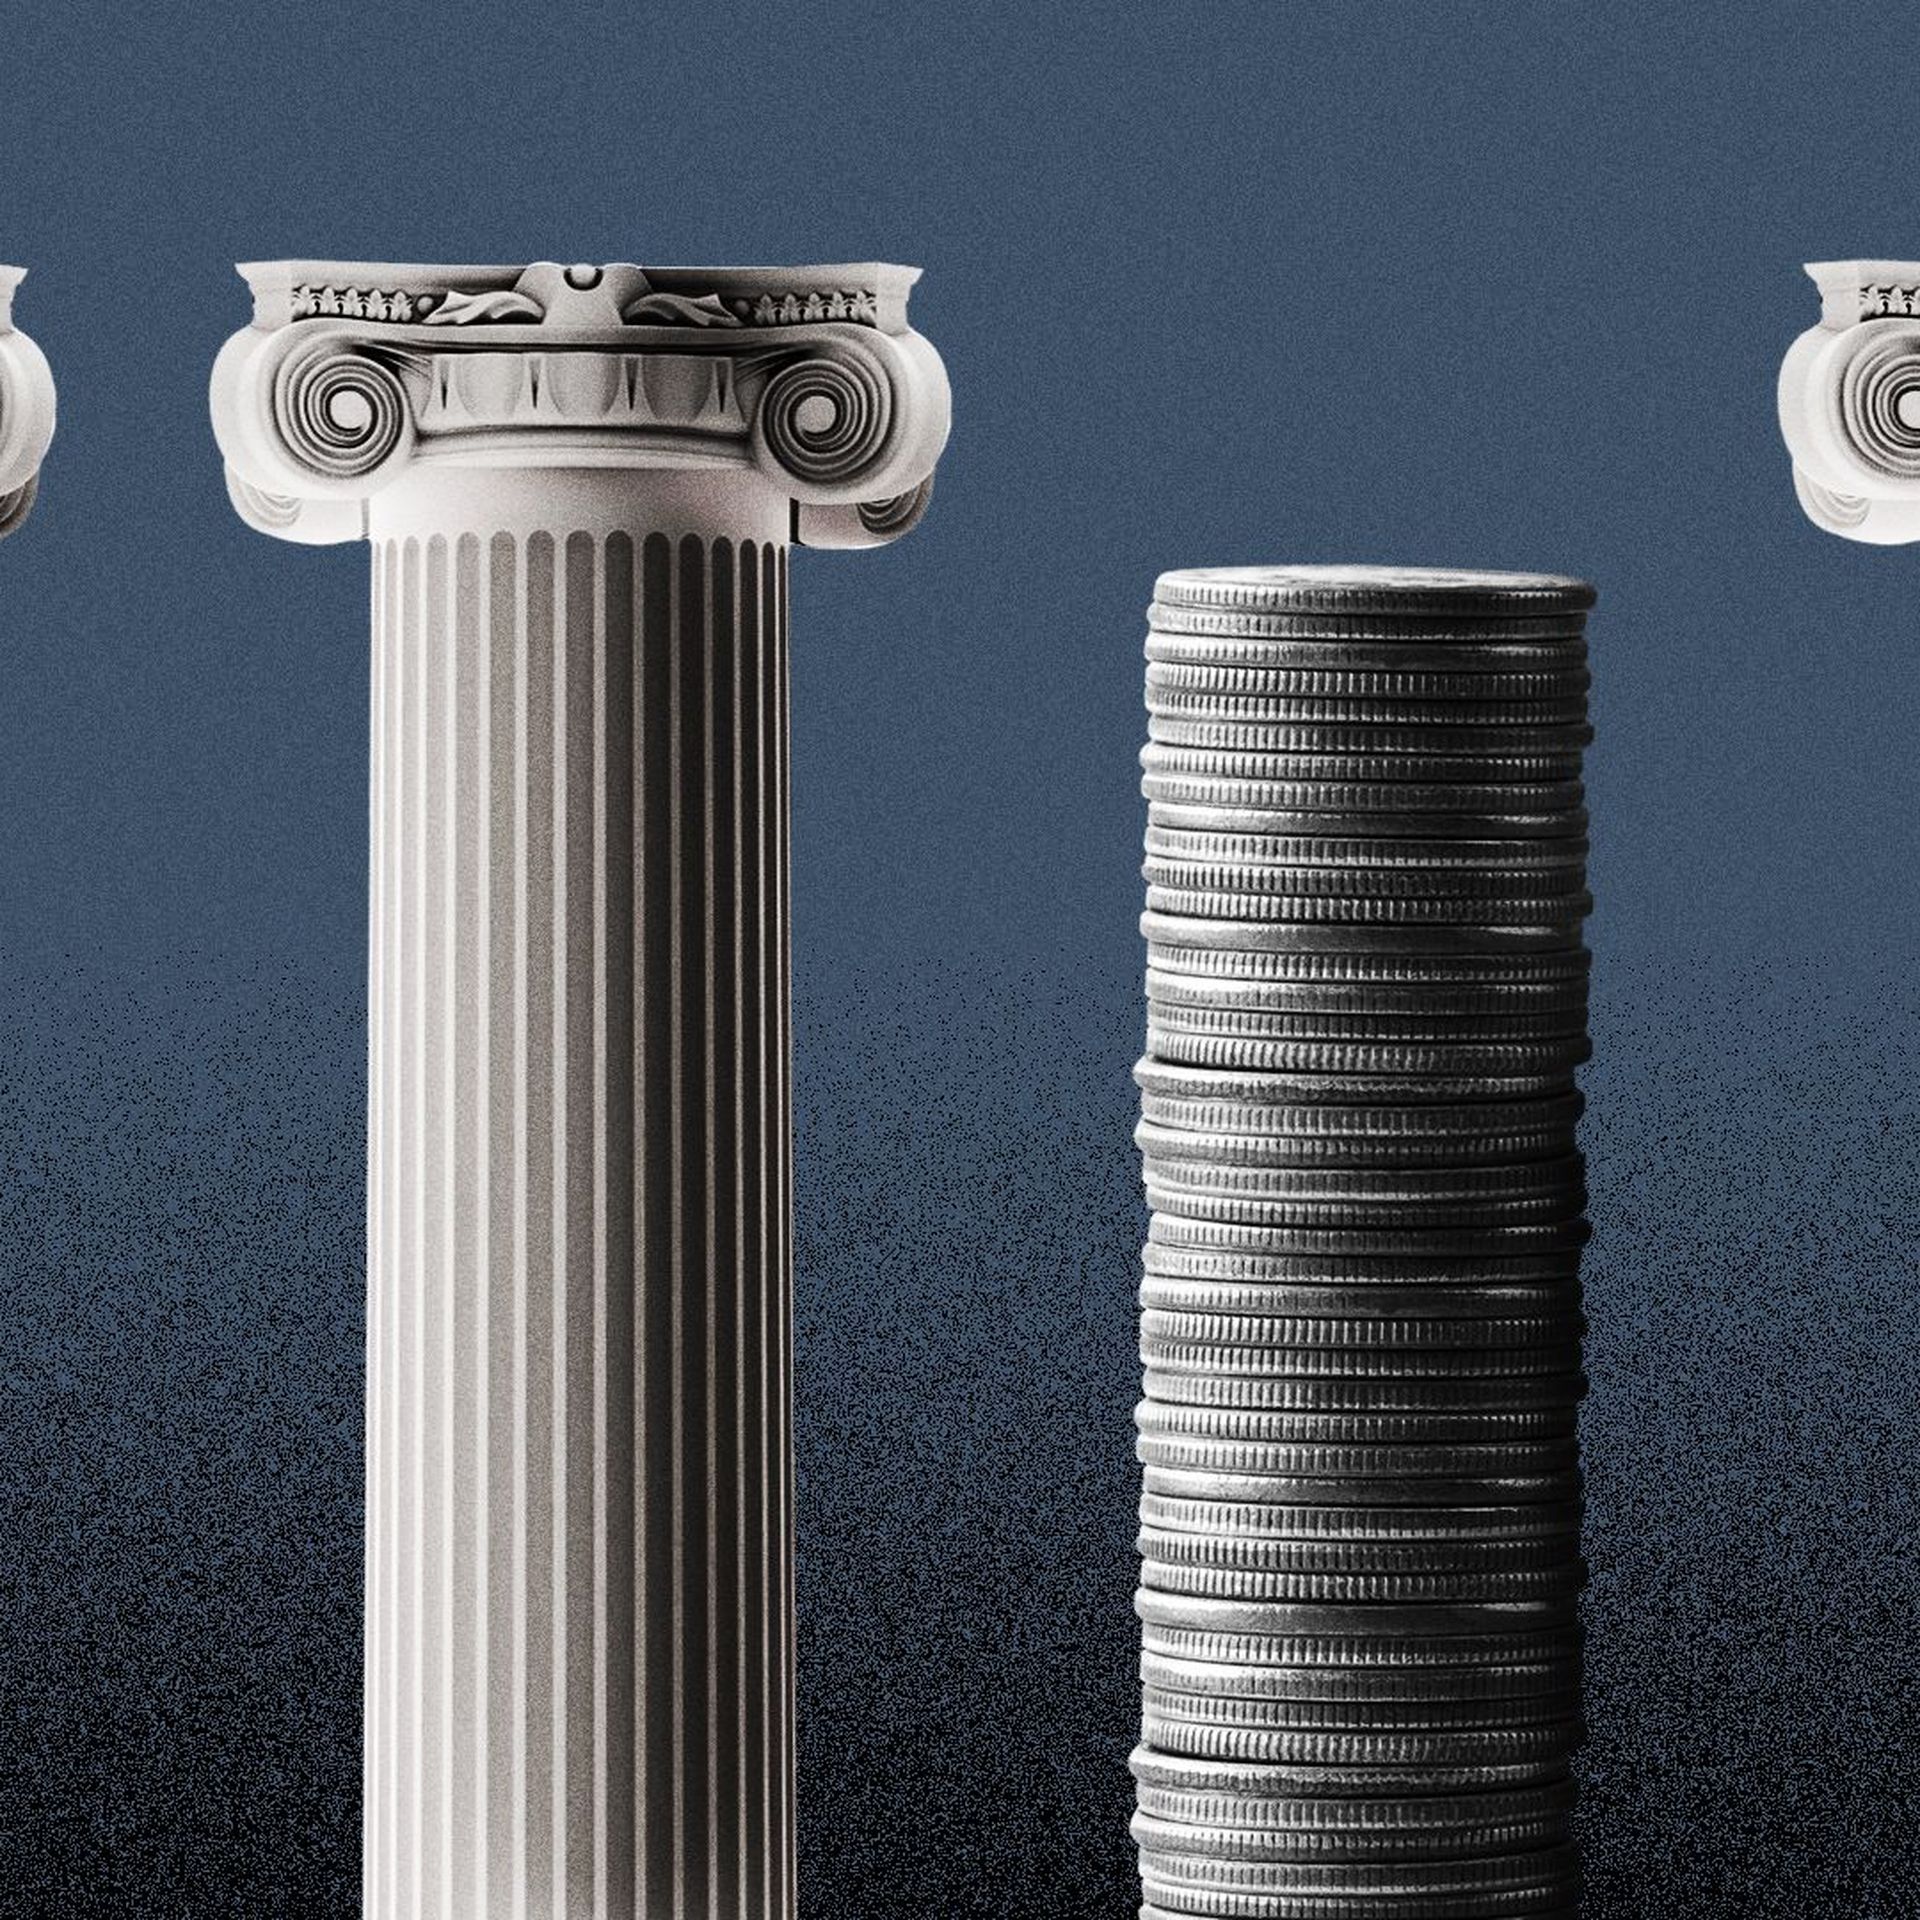 Illustration of Supreme Court columns, with one replaced with a stack of quarters.